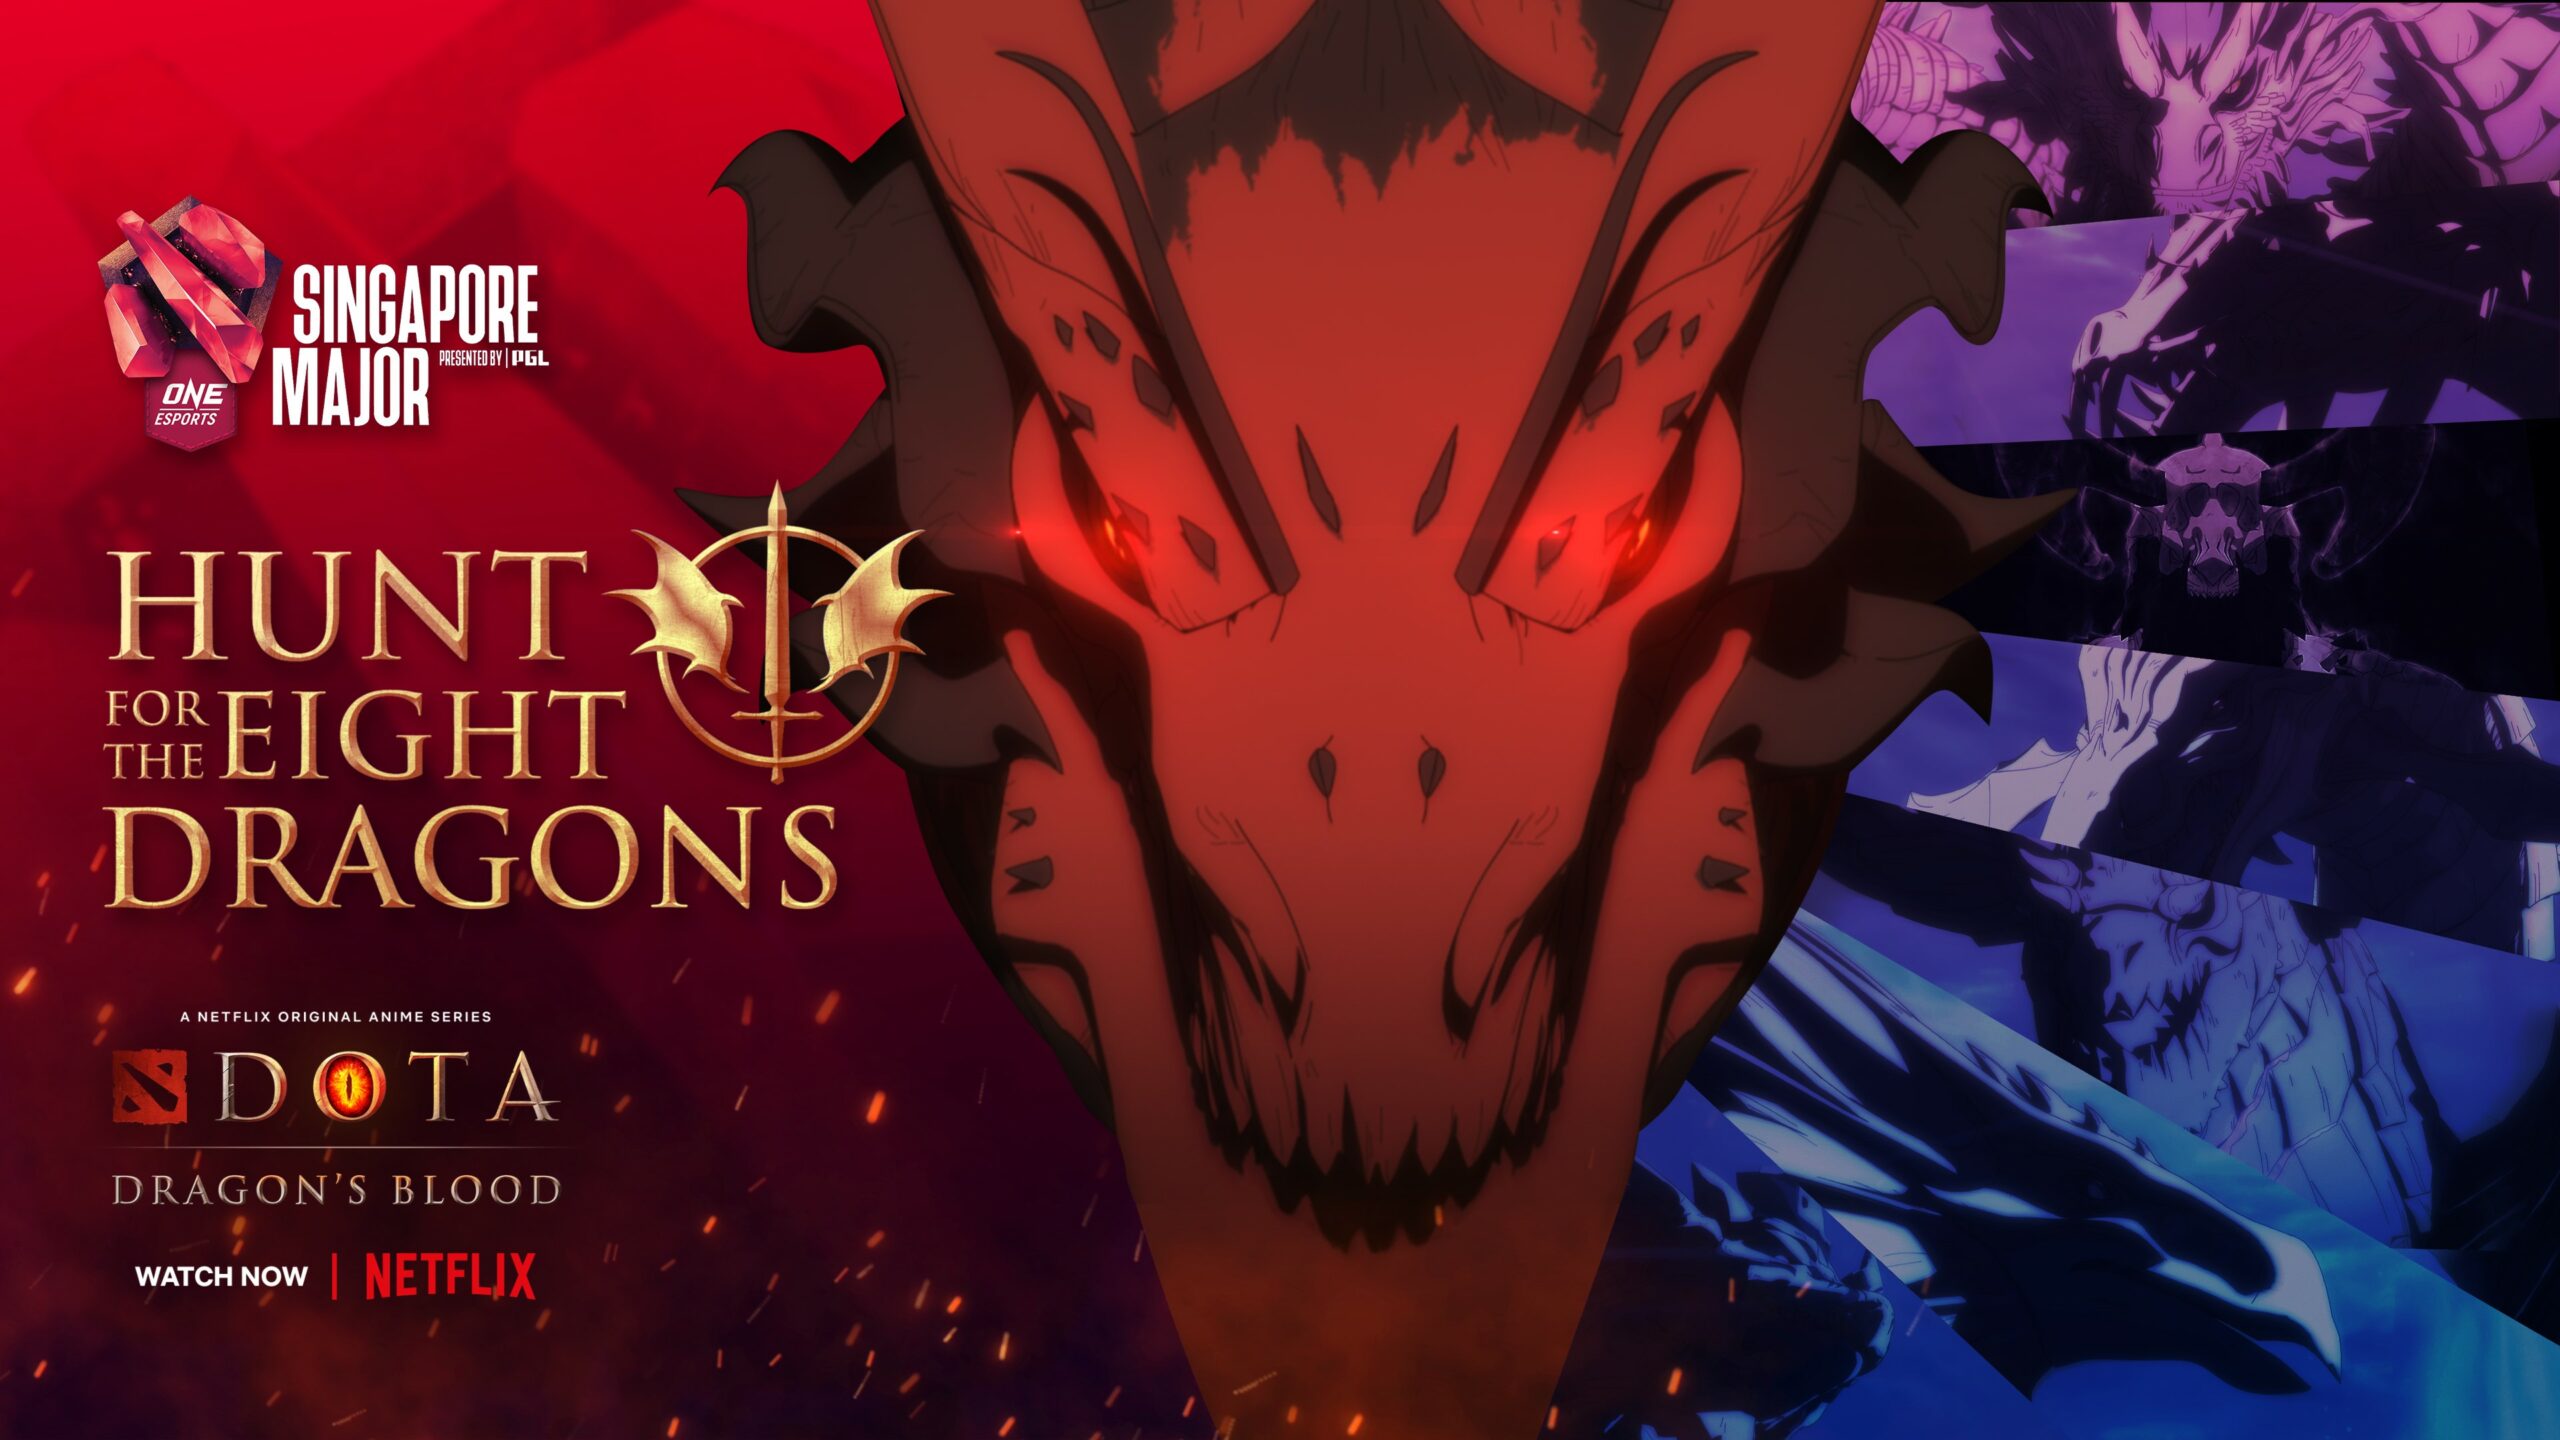 Did you find the Eight Dragons? See if your name is among the fastest Dragon  Knights | ONE Esports